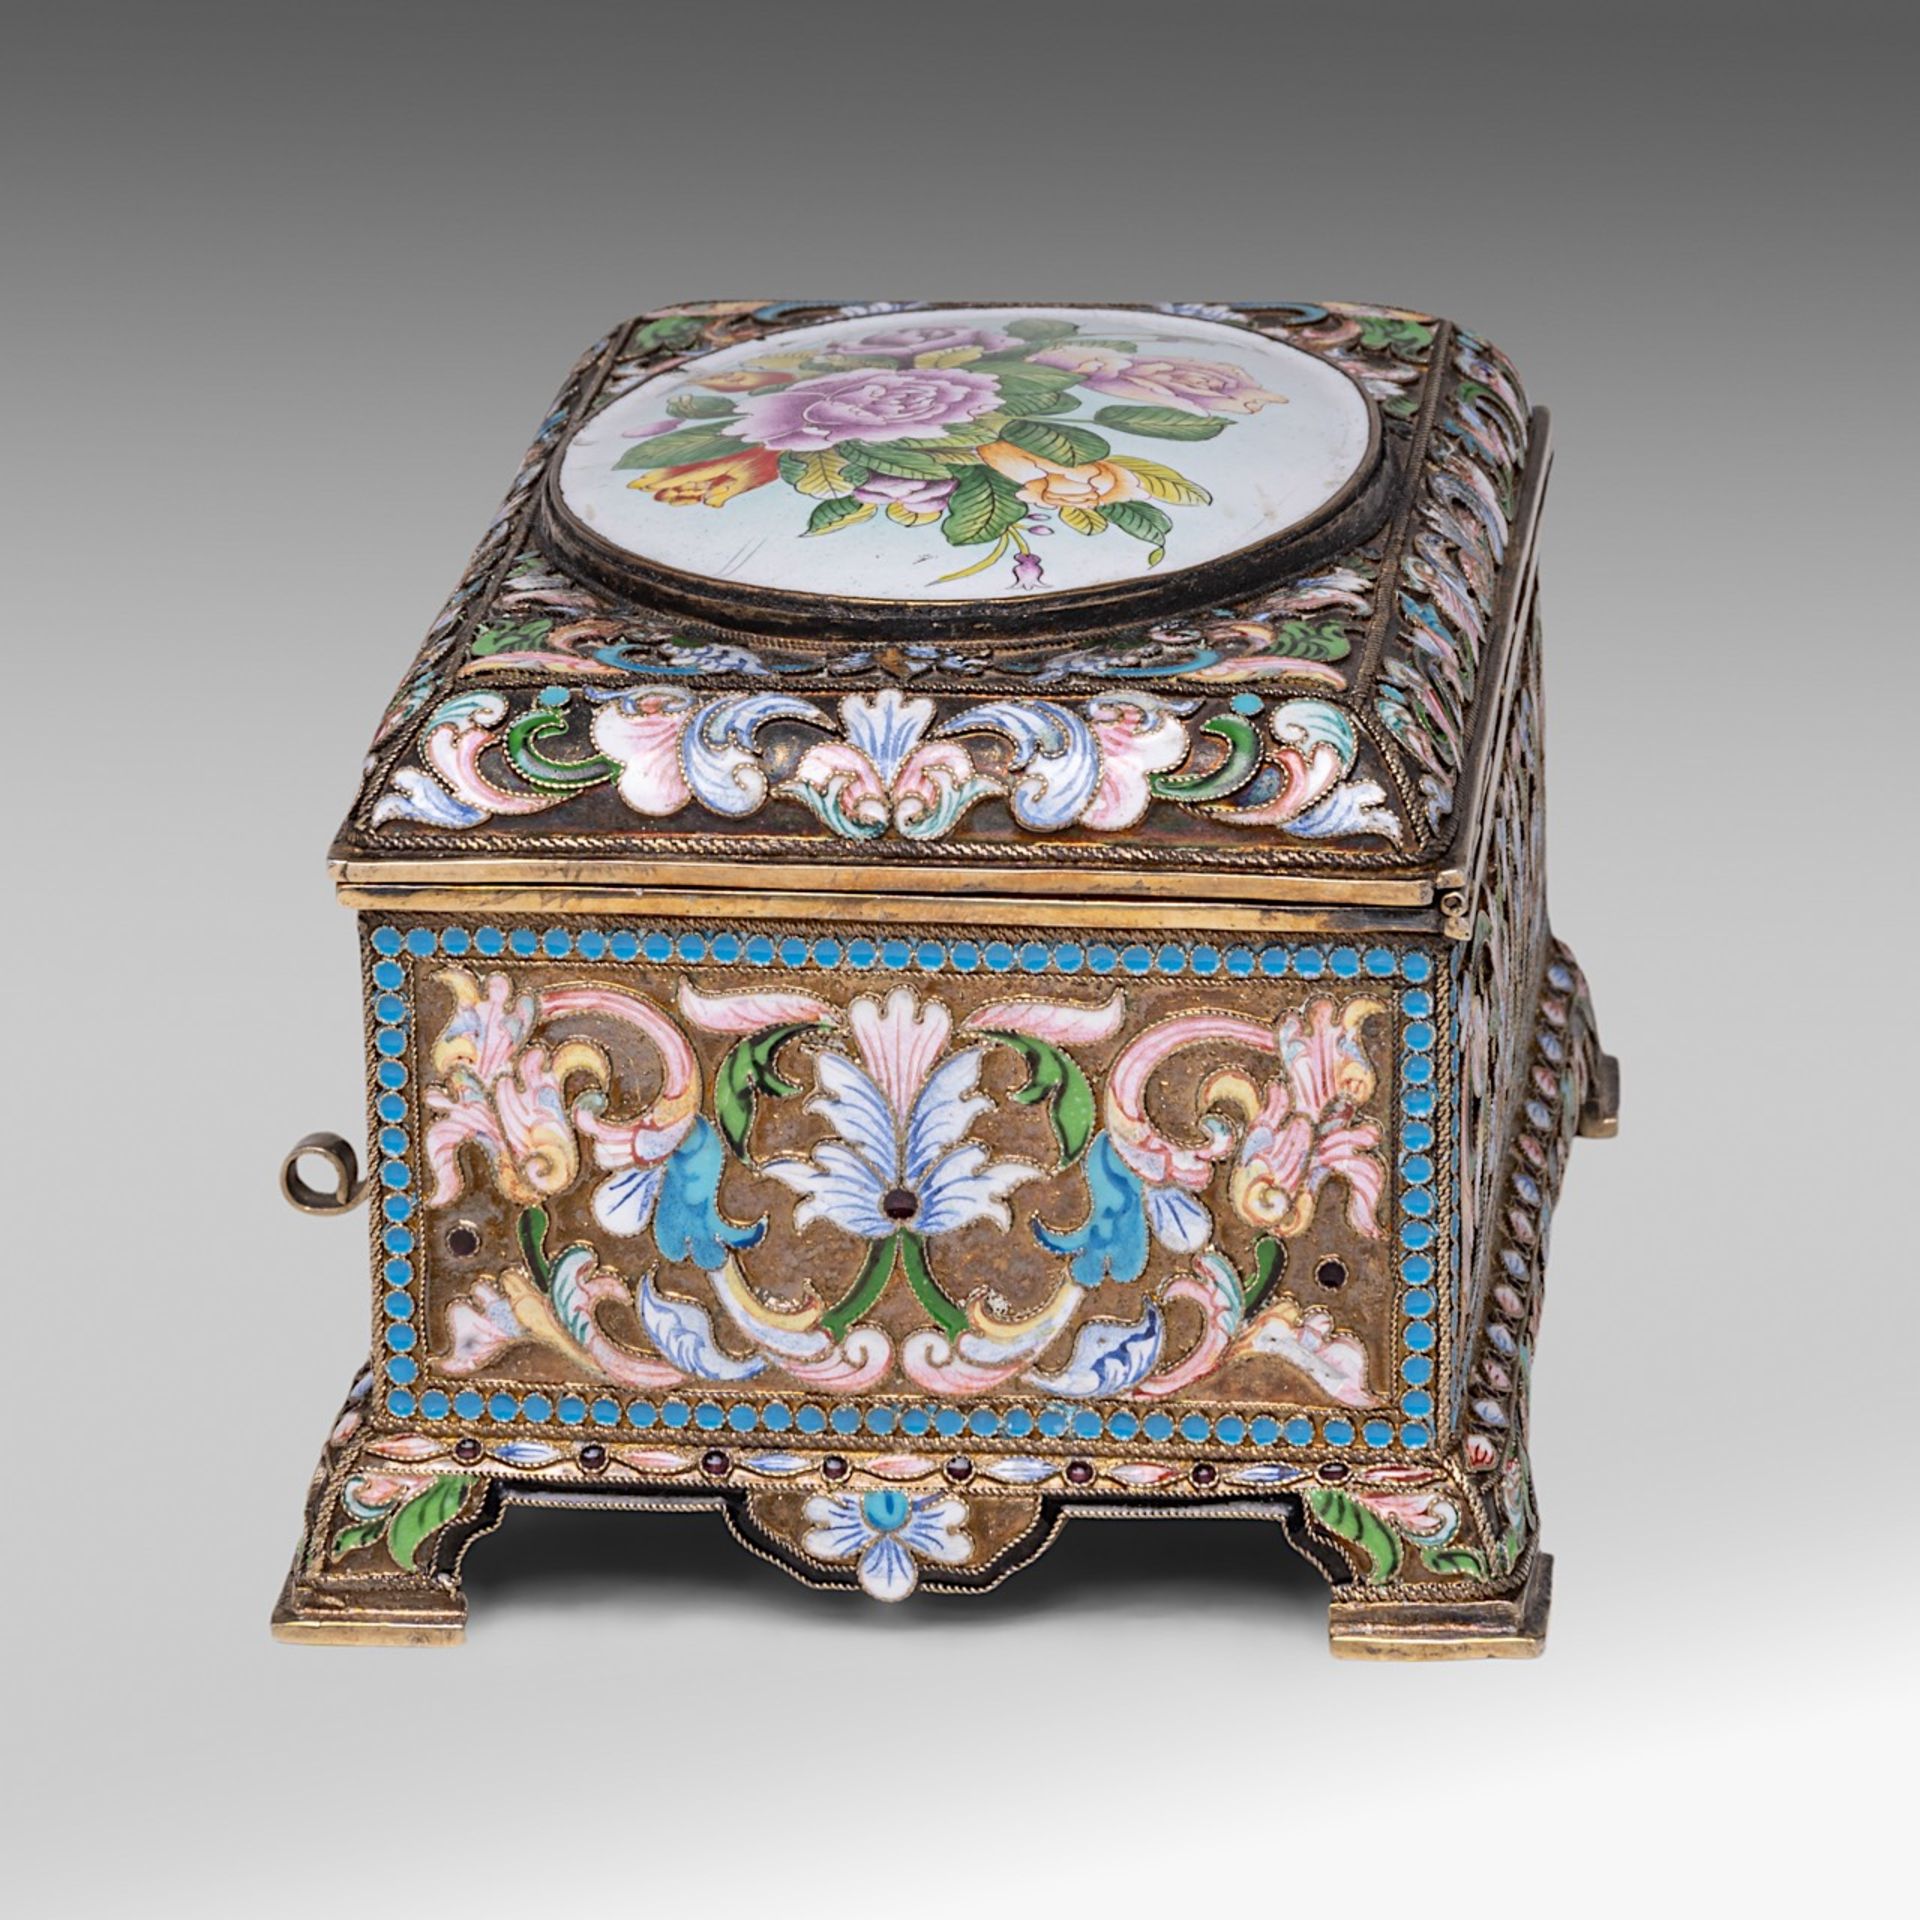 A Russian silver and enamel floral decorated jewellery box, hallmarked 84 Zolotniki, H 8 - 15 - 10 c - Image 3 of 9